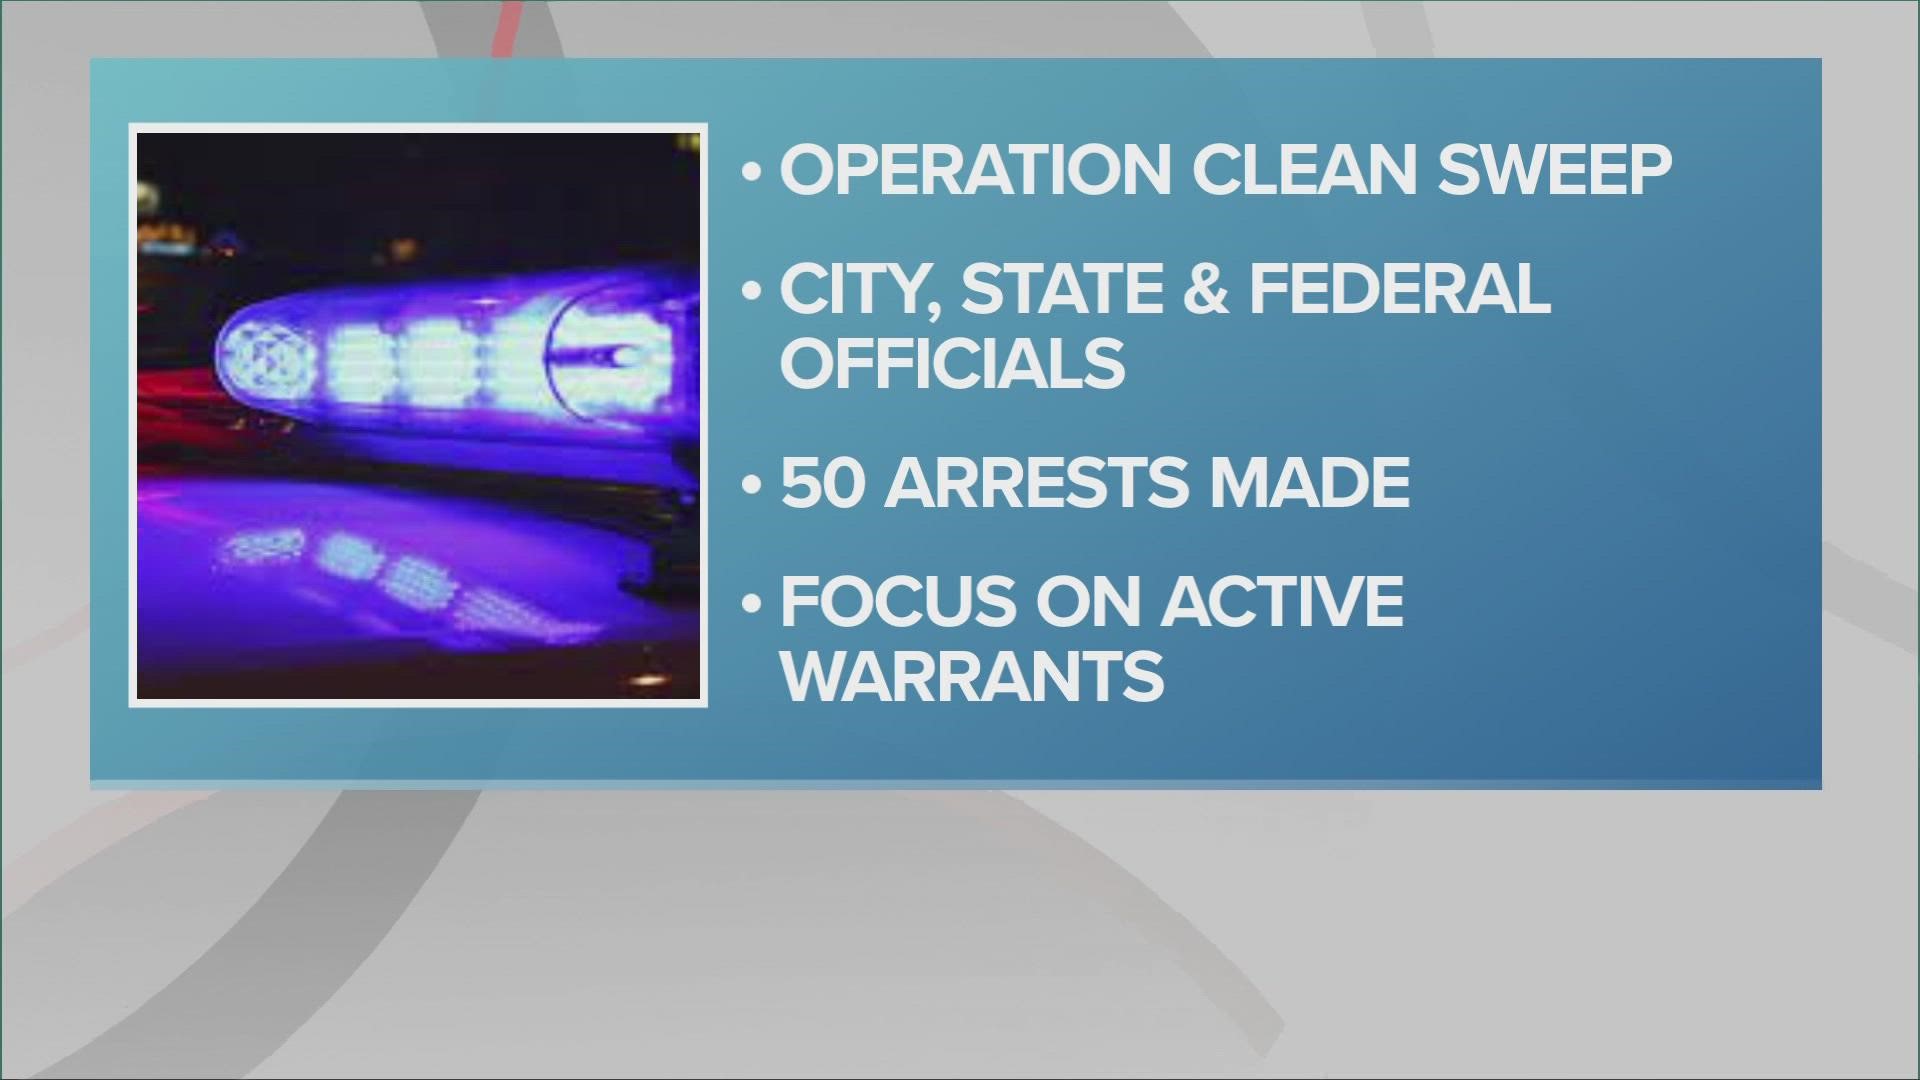 'Operation Clean Sweep' was a month long initiative that focused on apprehending violent offenders with active warrants.